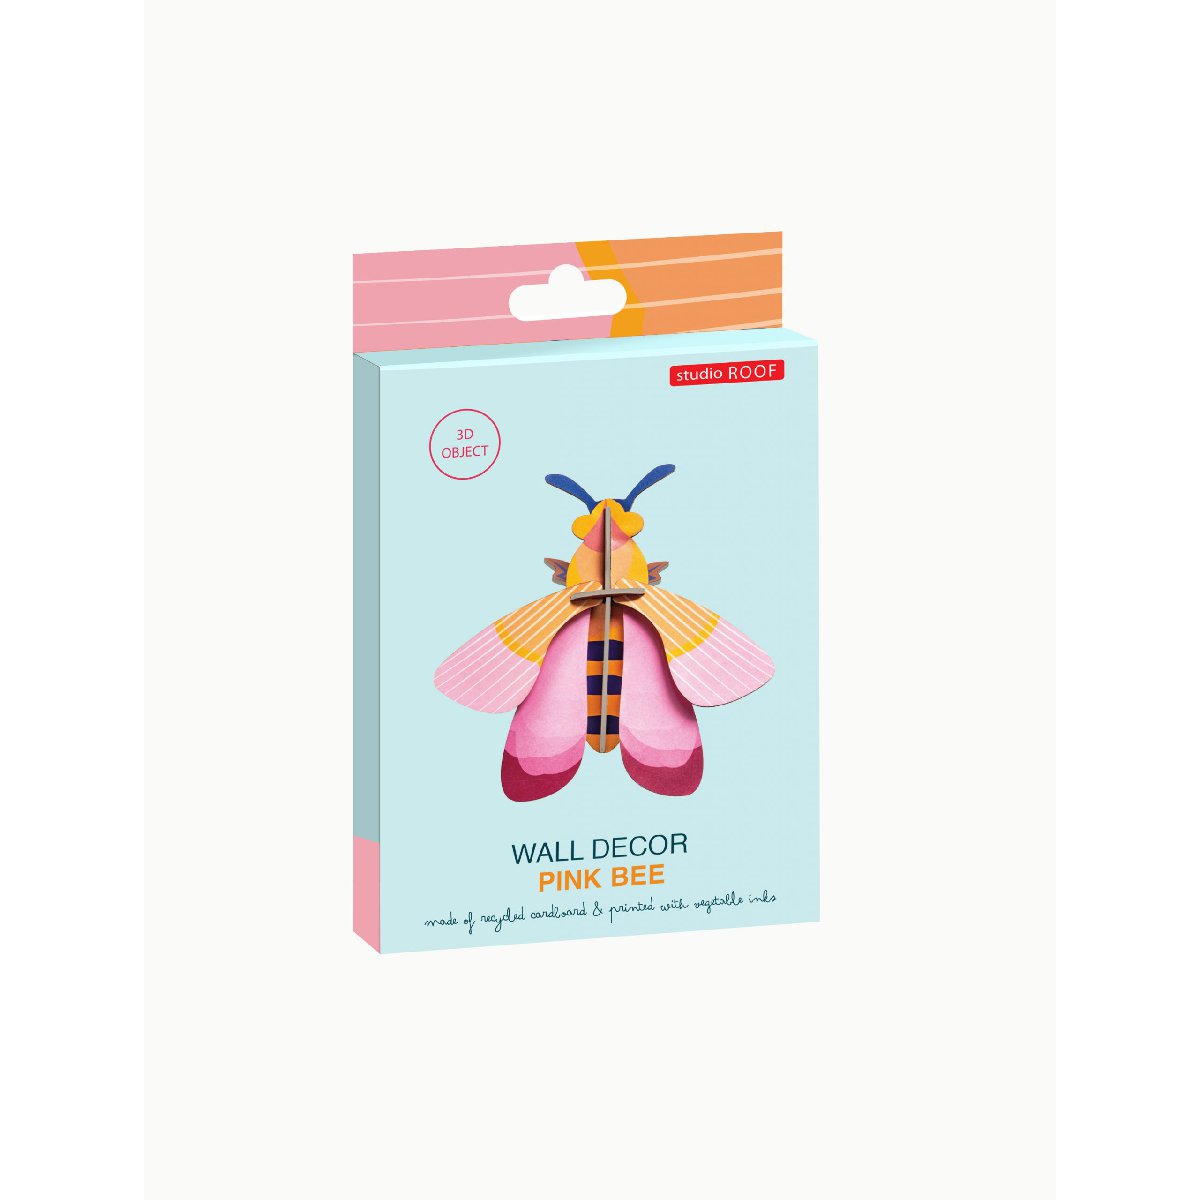 Studio Roof | pink bee wall decor - package